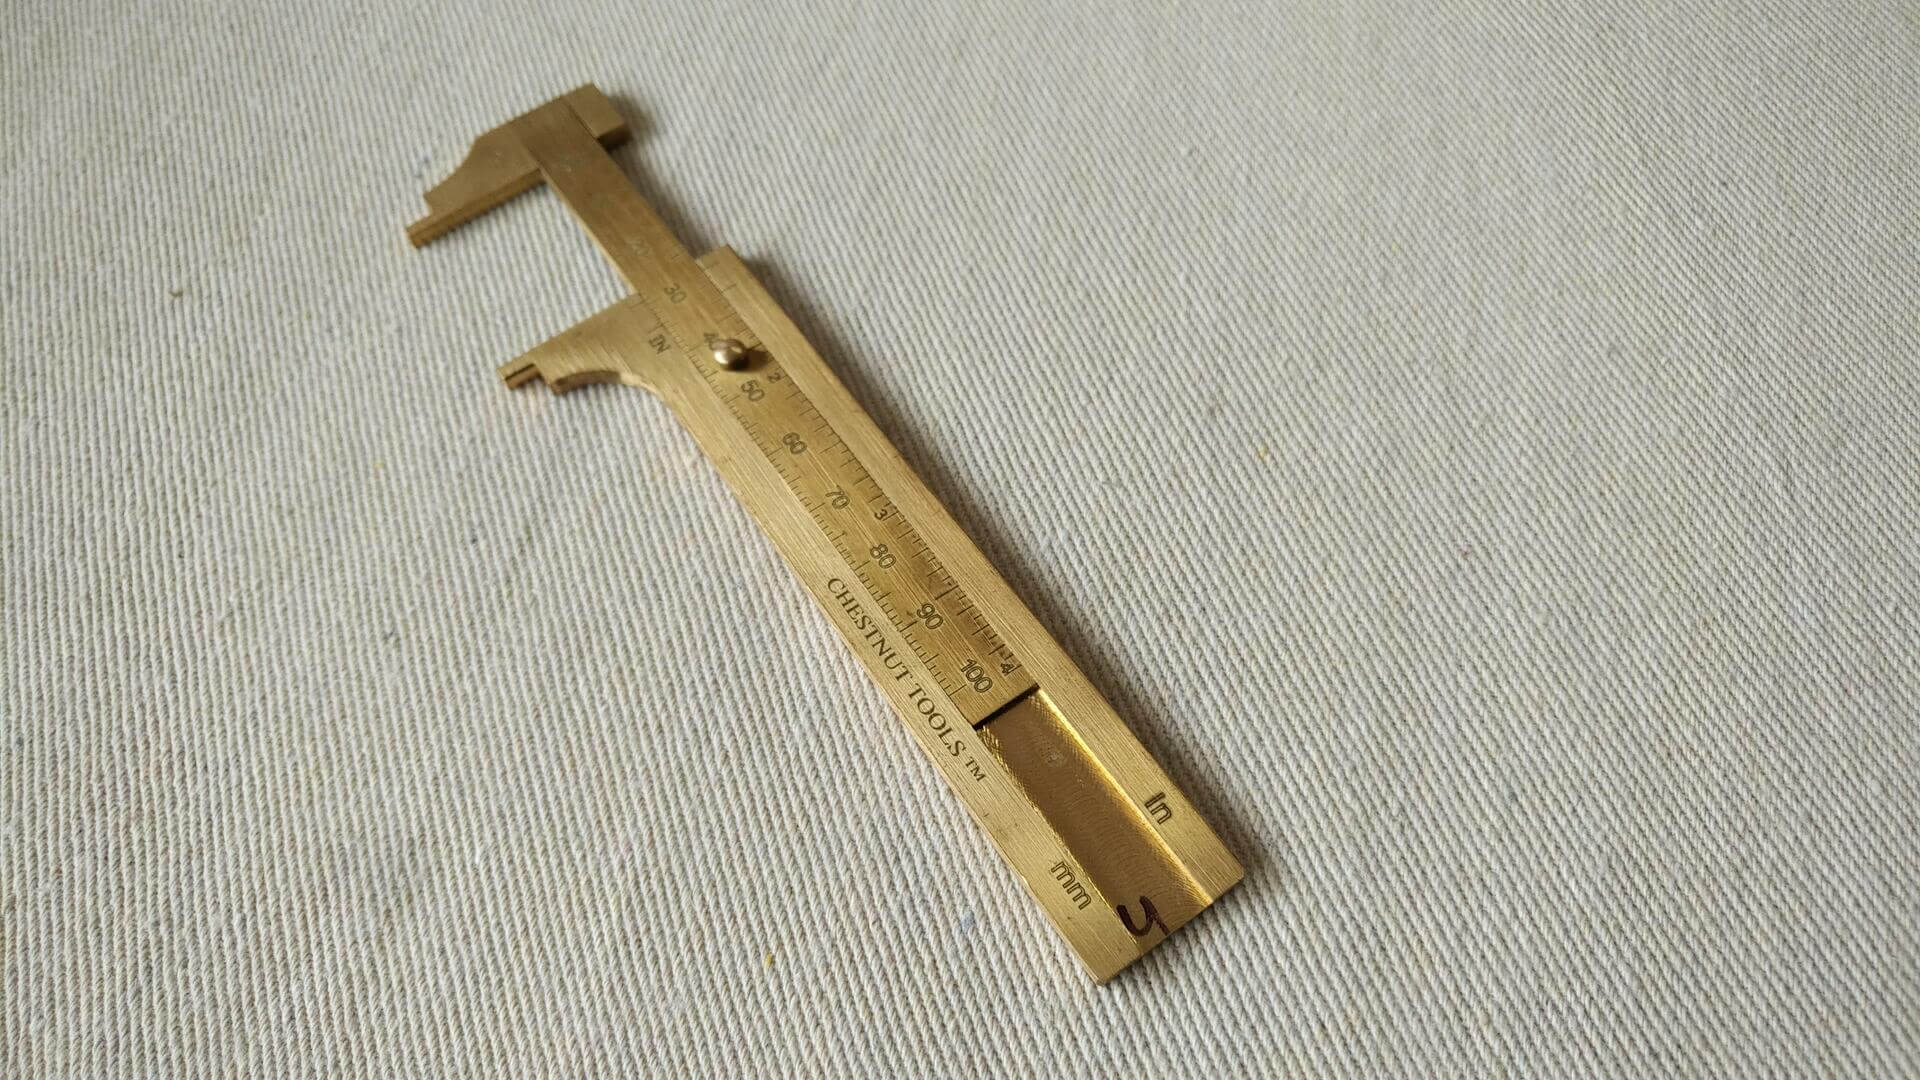 Solid brass inside and outside sliding mini caliper with both metric and imperial scales at 100mm or 4" capacity. Sized to fit in a shirt or apron pocket